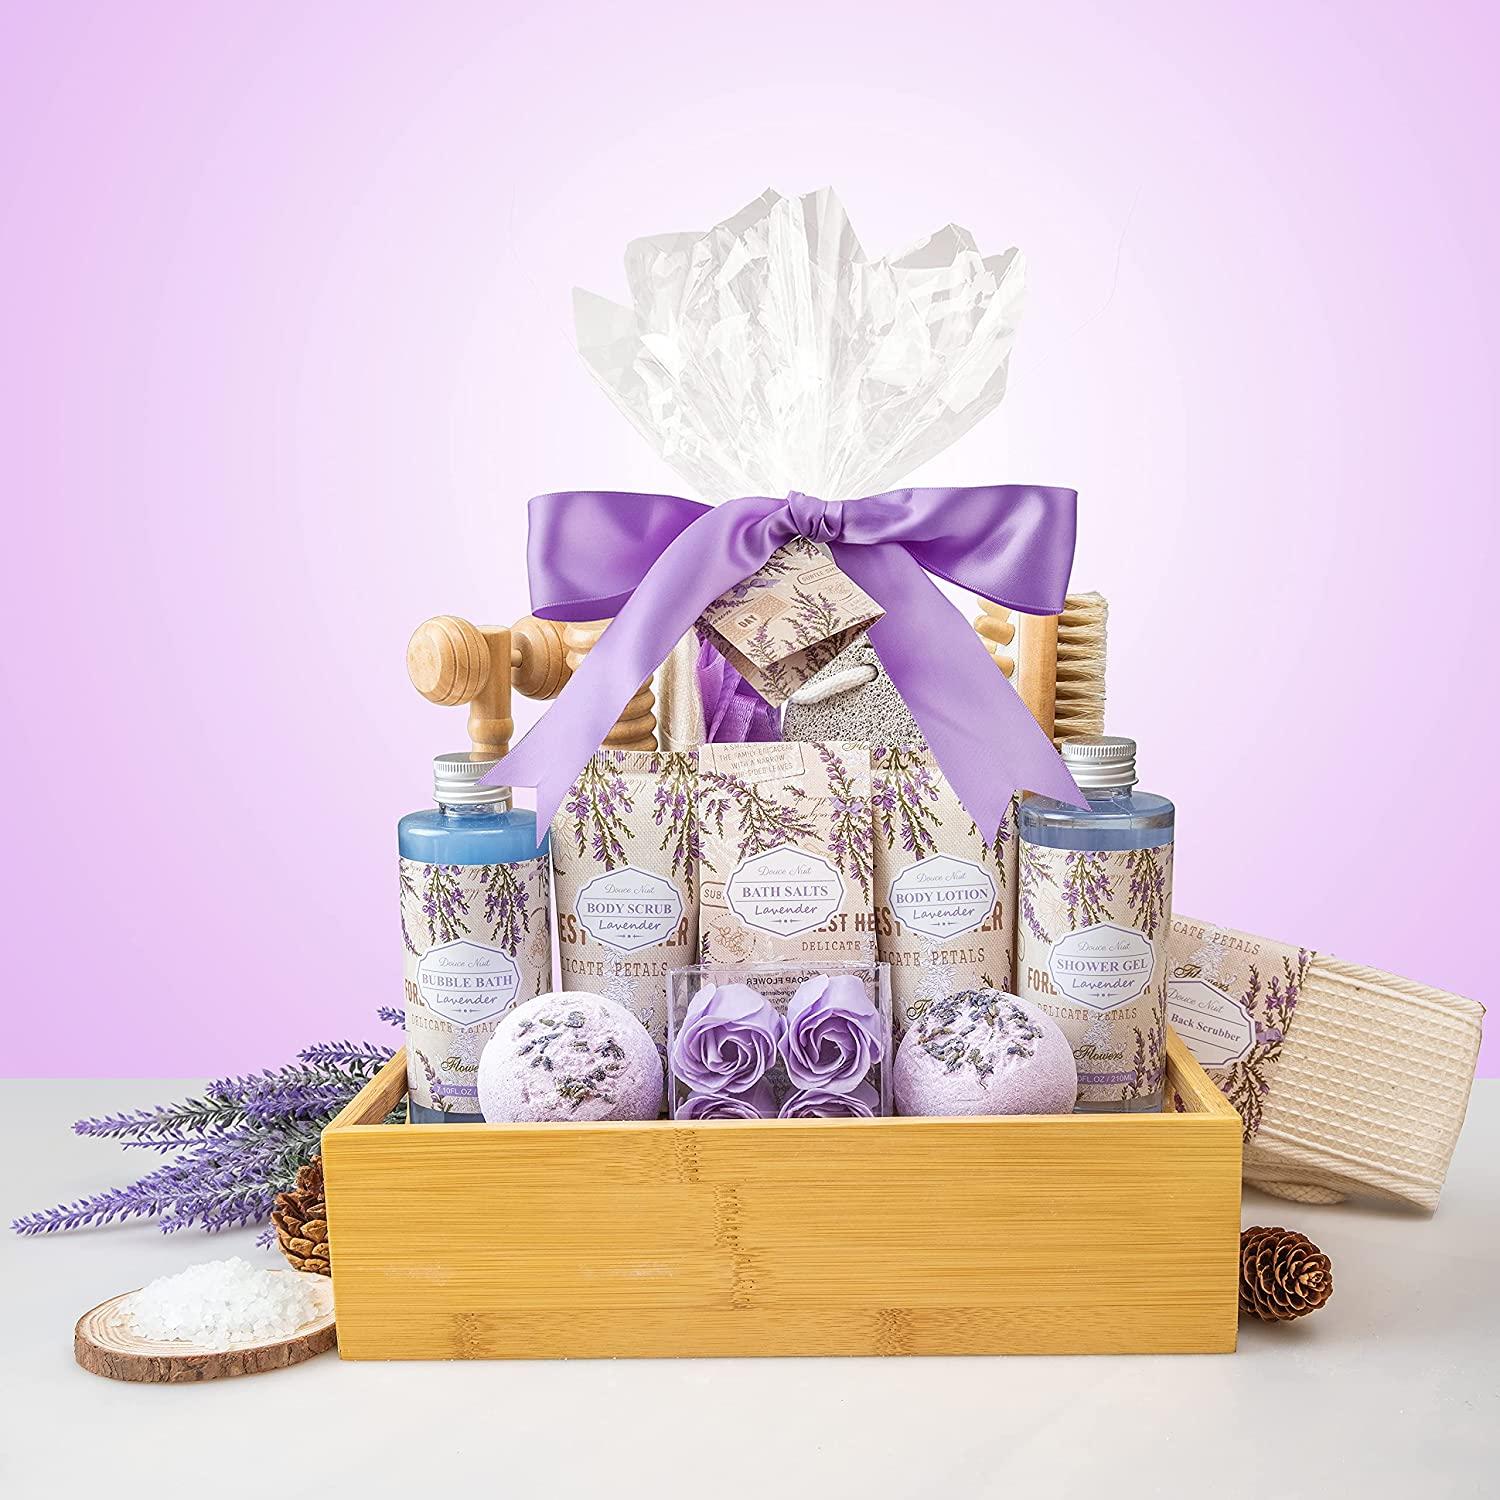 Birthday Gifts For Women, Gift Baskets For Women Mom Birthday Gifts  Anniversary Gift For Her Gifts For Girlfriend Daughter Friend Wife Teacher  Gifts Lavender Bath Spa Purple Gift Bags Christmas Gifts |